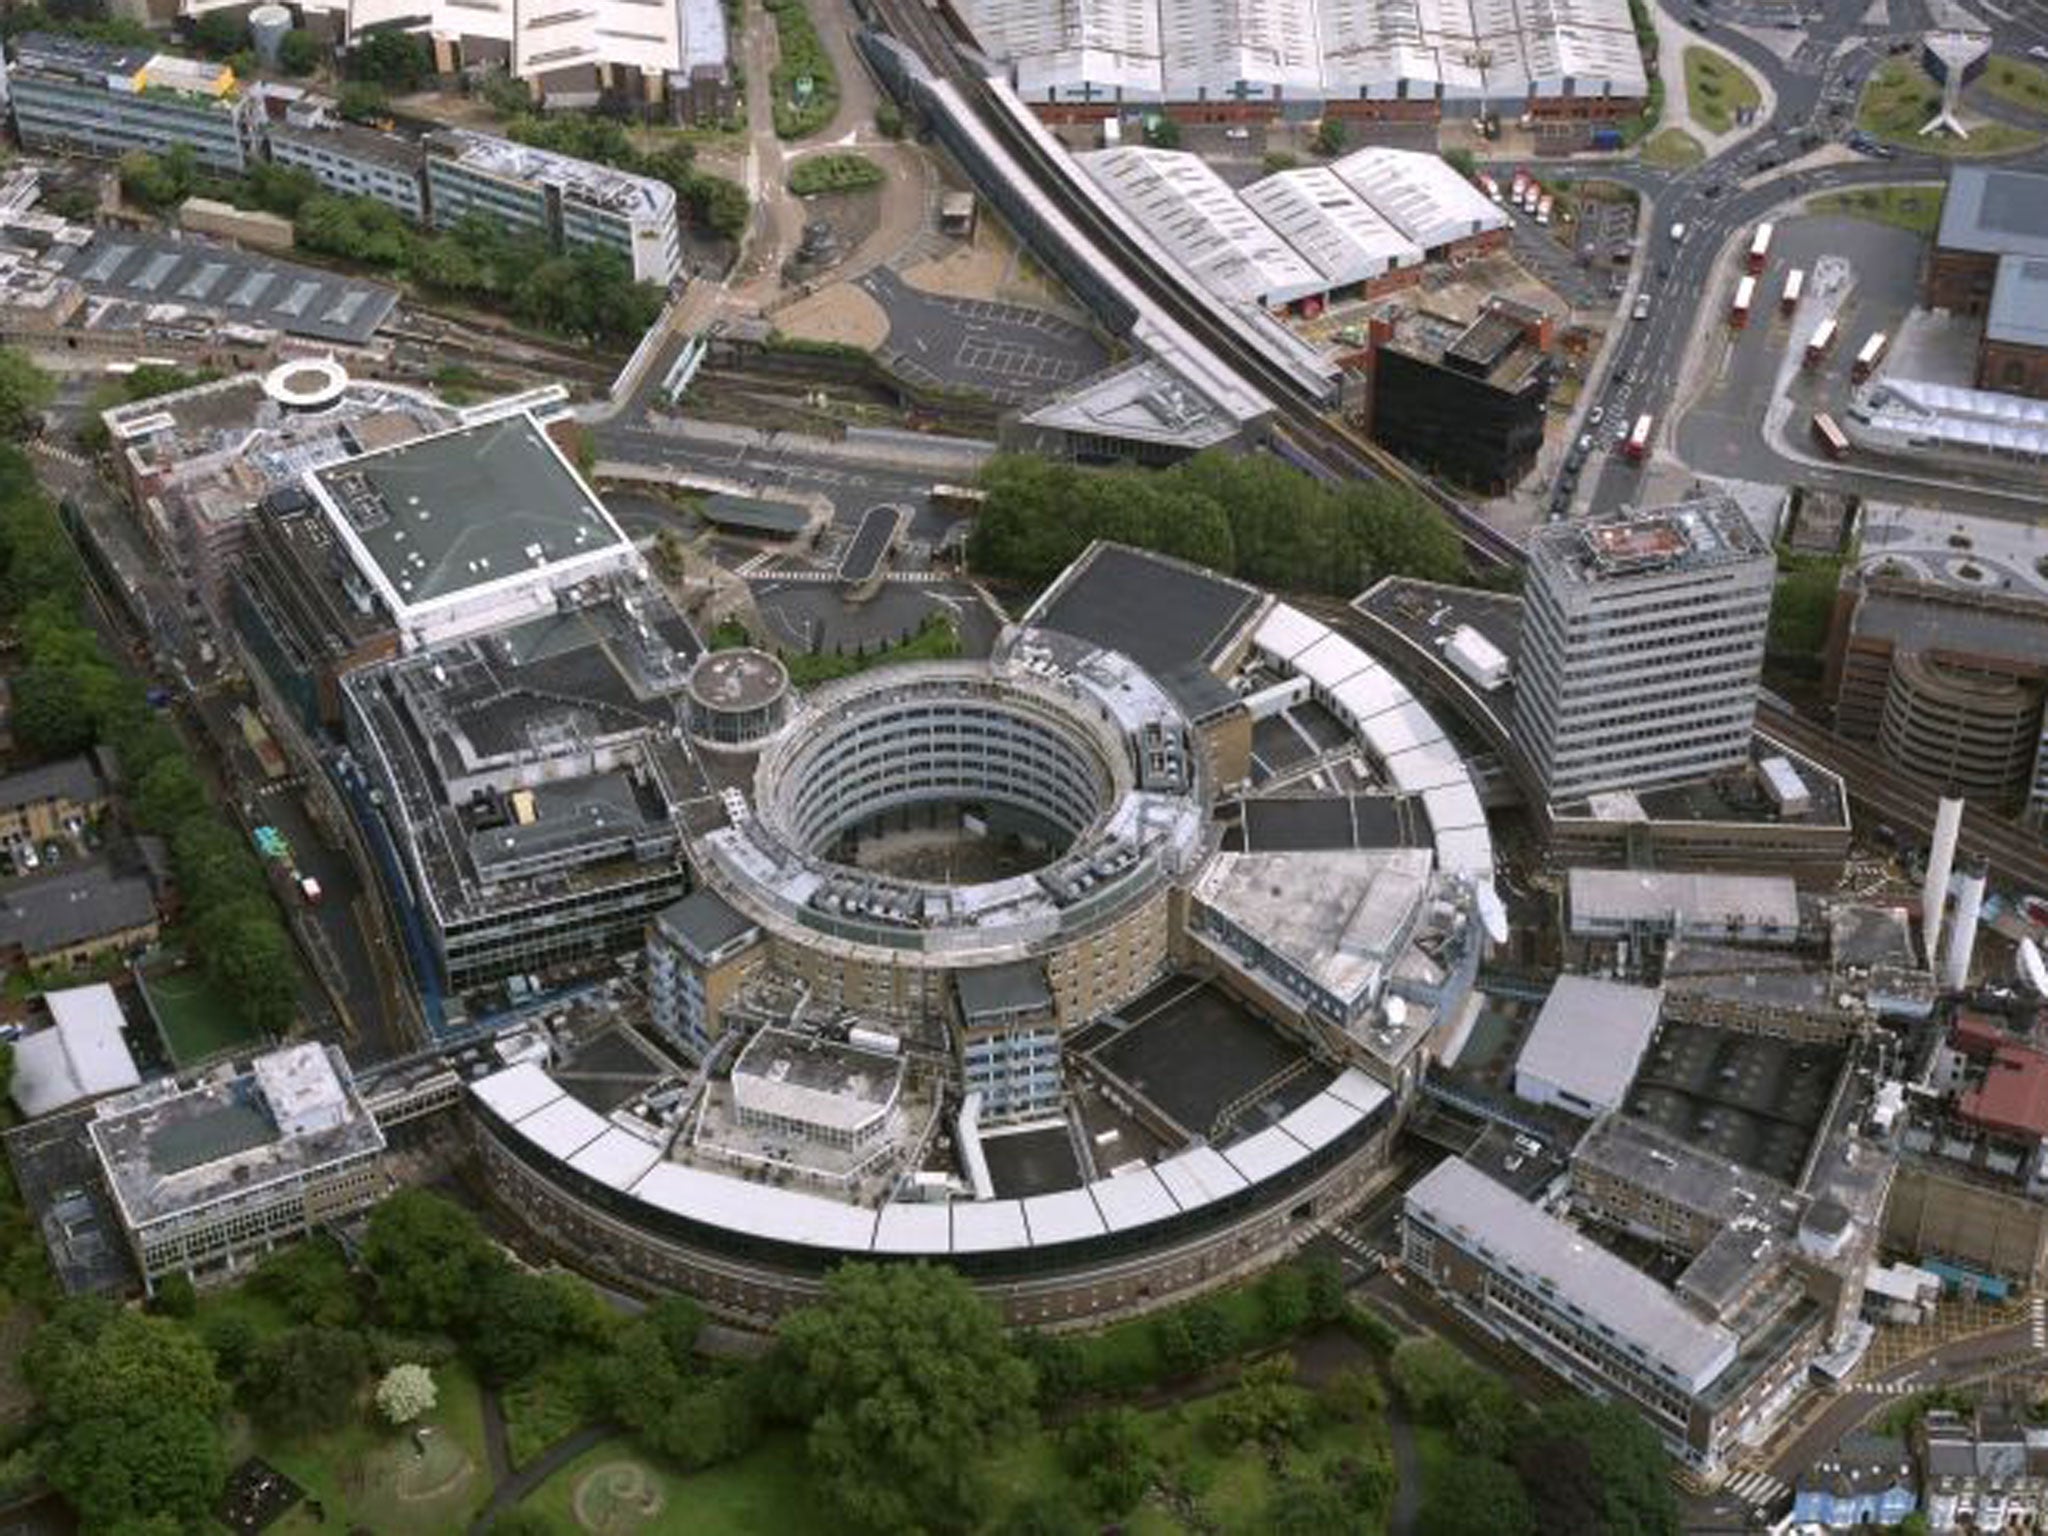 The BBC Television Centre seen from the air